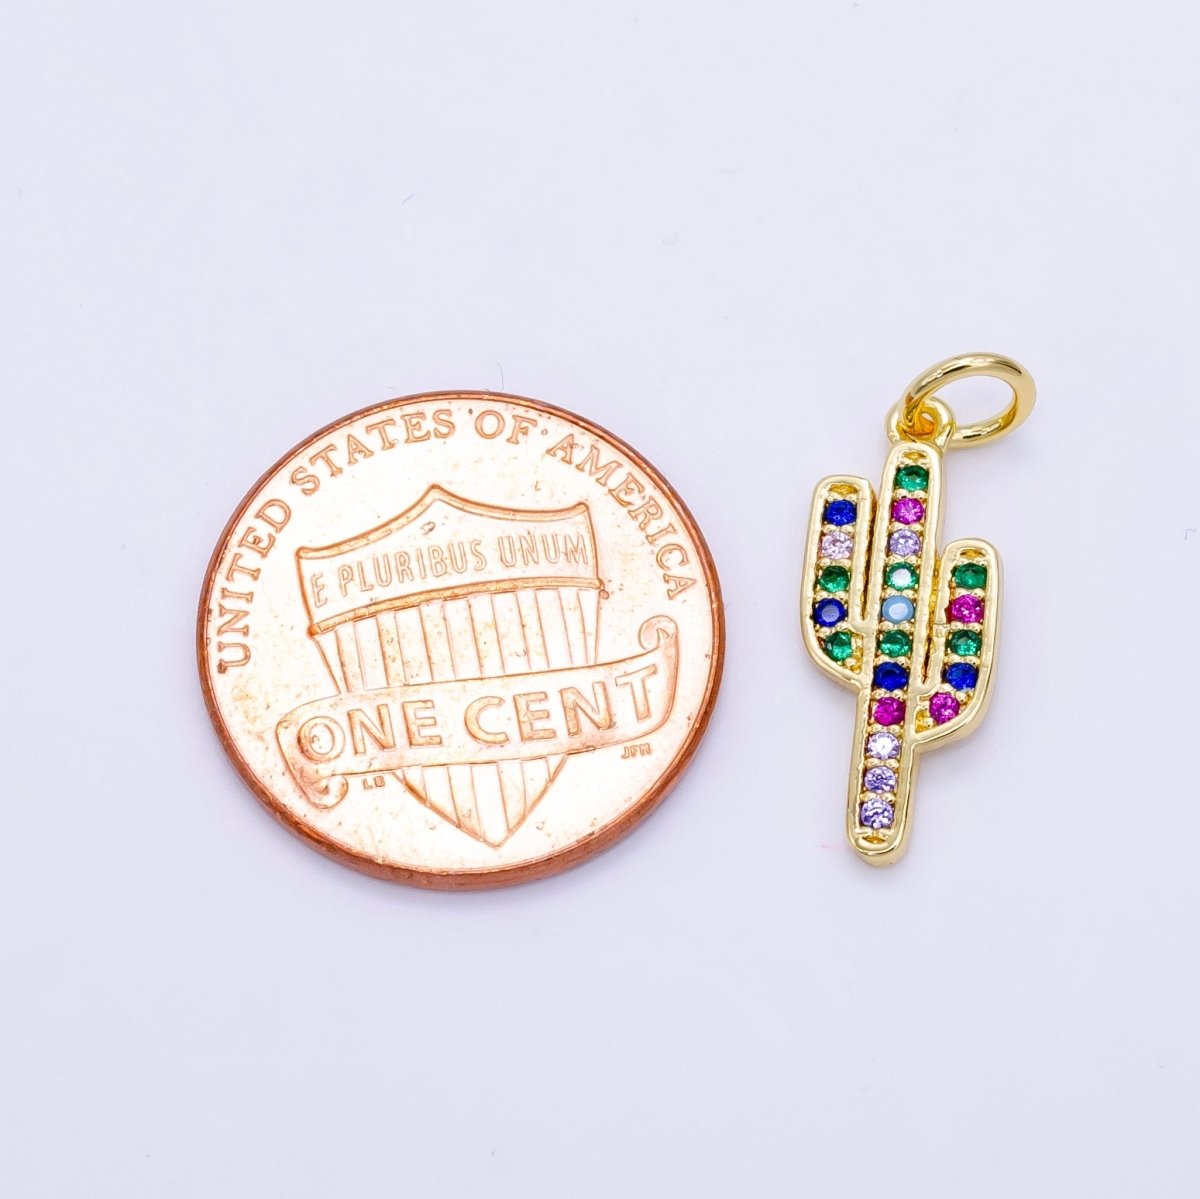 Dainty Cactus Charm Saguaro Pendant Gold Filled Charm for Teen Jewelry Colorful Micro Pave charm Necklace Earring Bracelet Charm Supply C-629 - DLUXCA